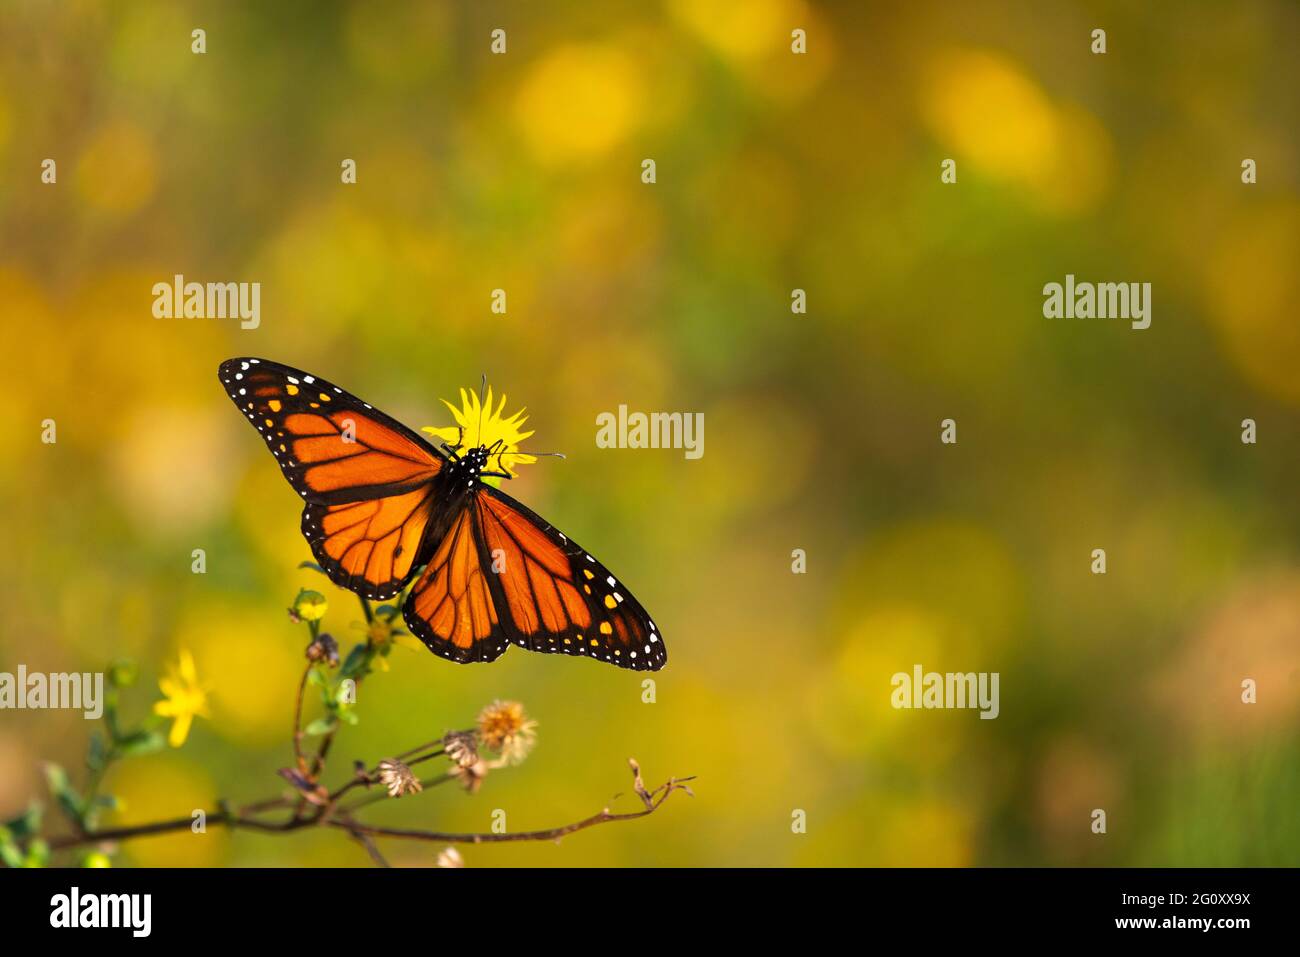 A monarch butterfly rests on a flower in Daphne, AL, on Oct. 20, 2020. The image features copy space on the right and above the focal point. Stock Photo